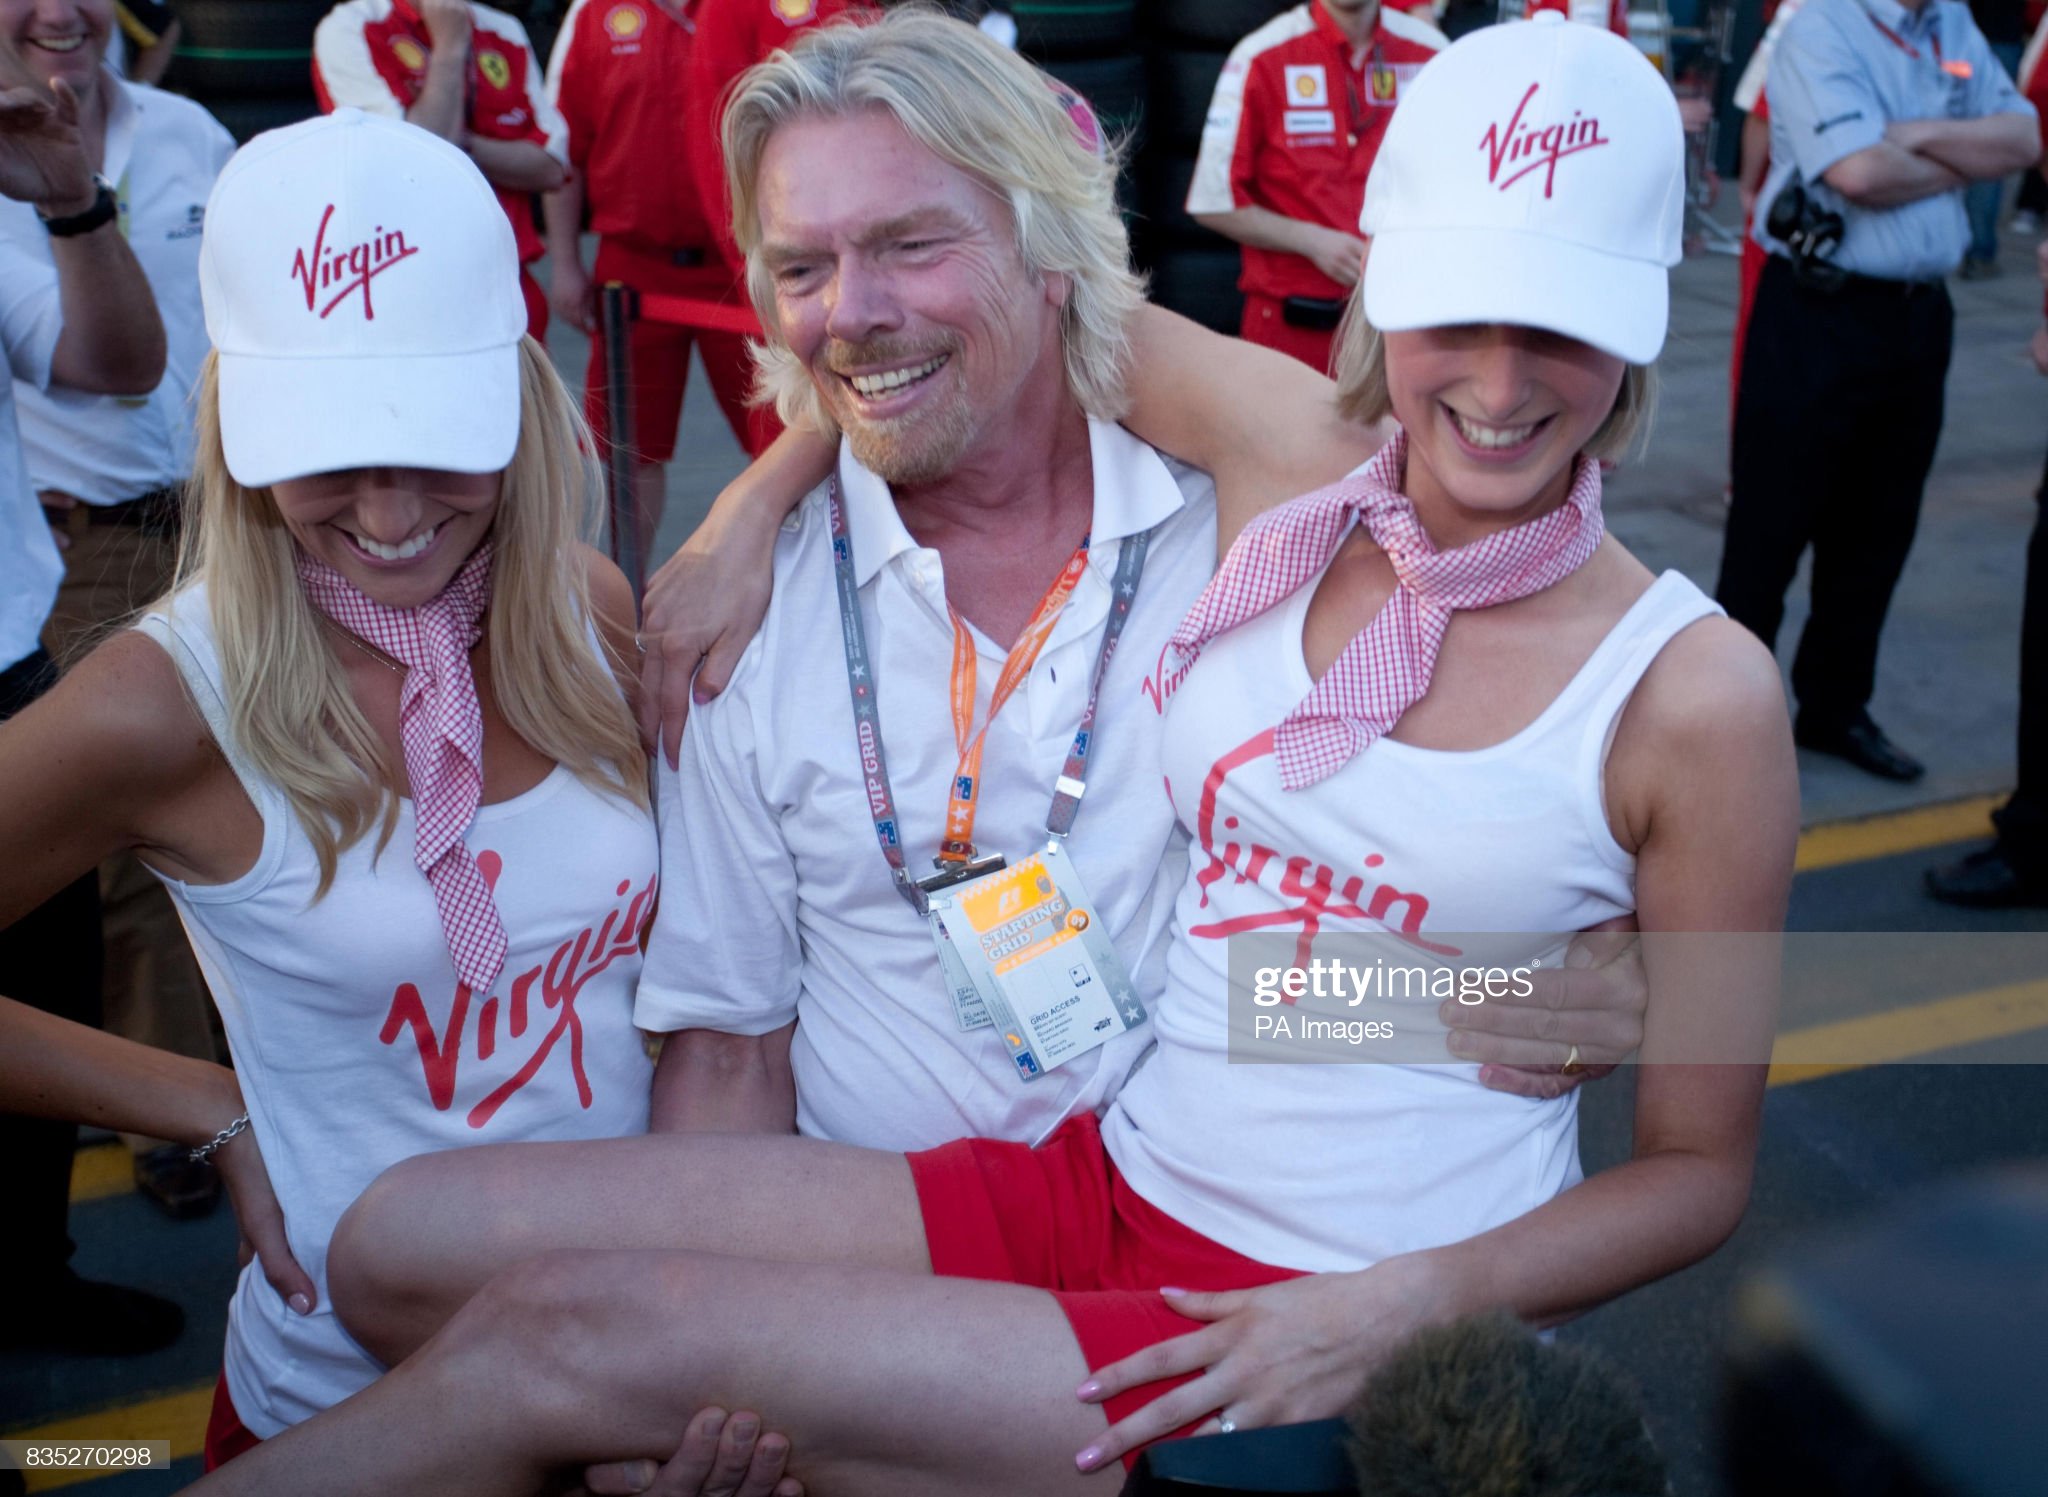 Brawn GP's main sponsor Virgin's Sir Richard Branson celebrates Brawn's first and second places during the Australian Grand Prix at Albert Park in Melbourne, Australia, on 29 March 2009. 